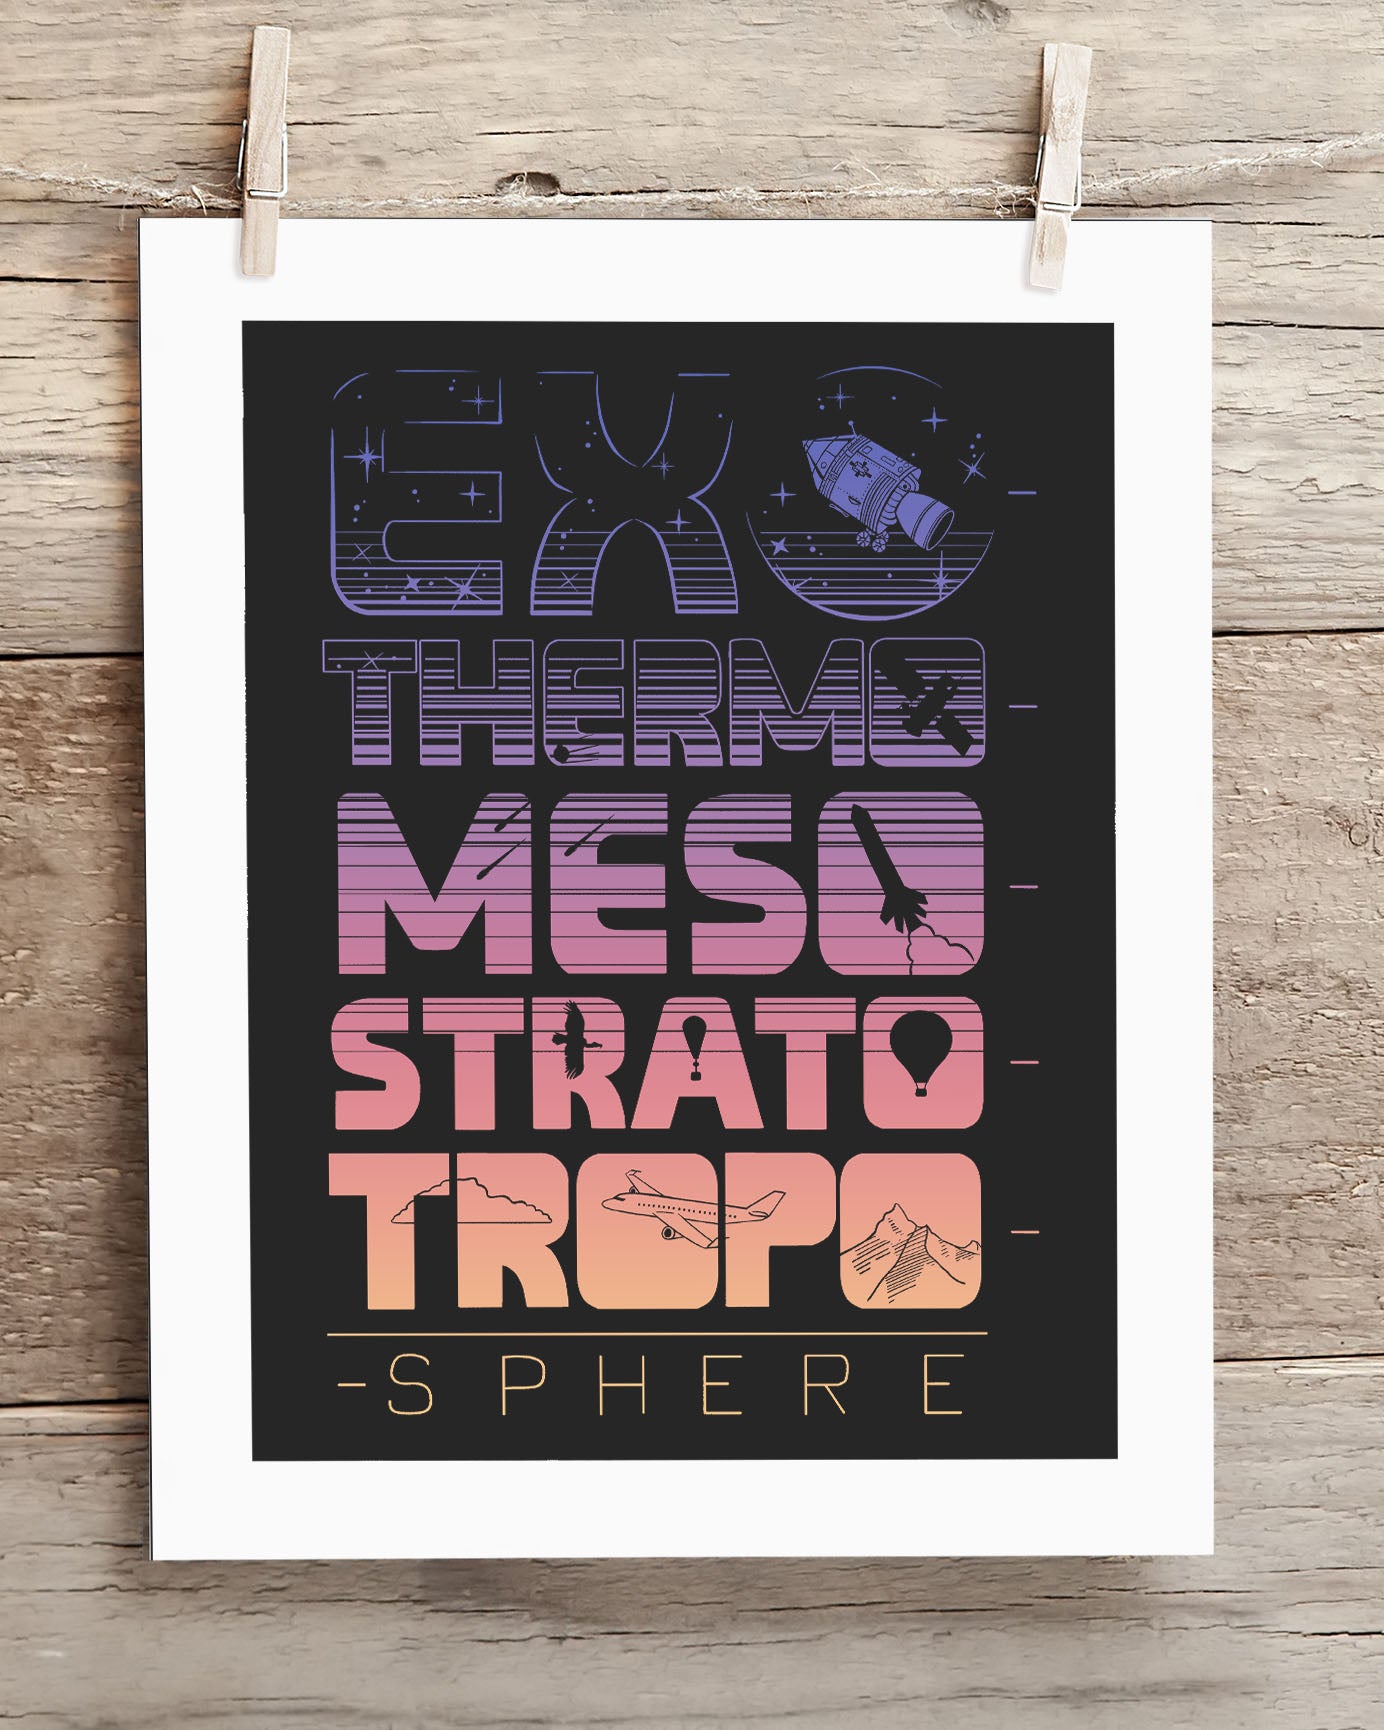 A "Above the Earth Museum Print" by Cognitive Surplus with the words exo thermo meso strato strop sphere.